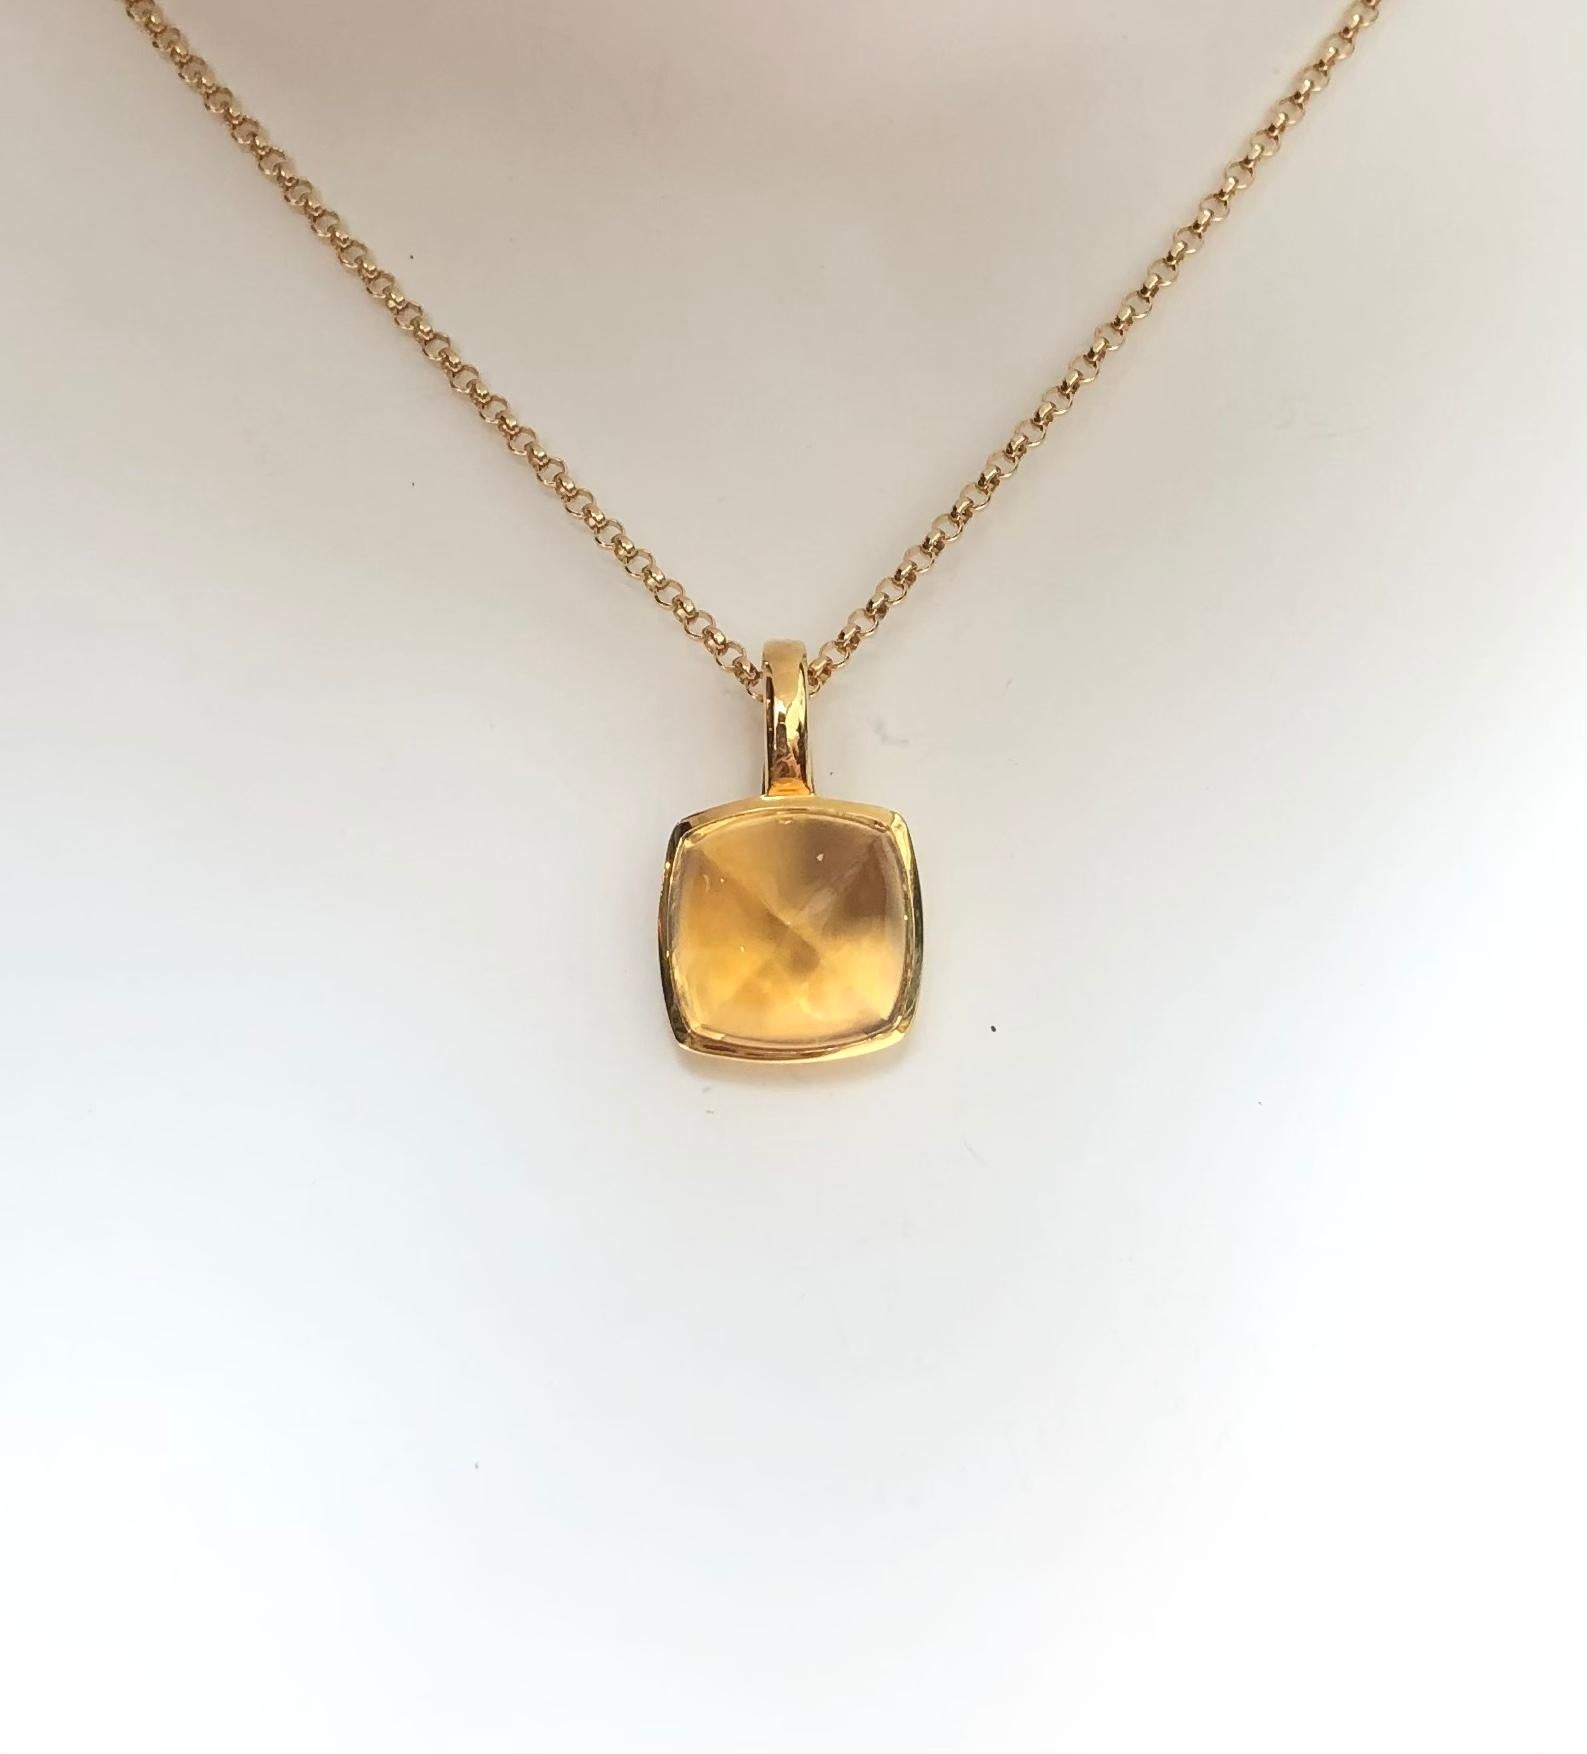 Citrine 9.44 carats Pendant set in 18 Karat Gold Settings
(chain not included)

Width:  1.0 cm 
Length: 2.1 cm
Total Weight: 4.49 grams

